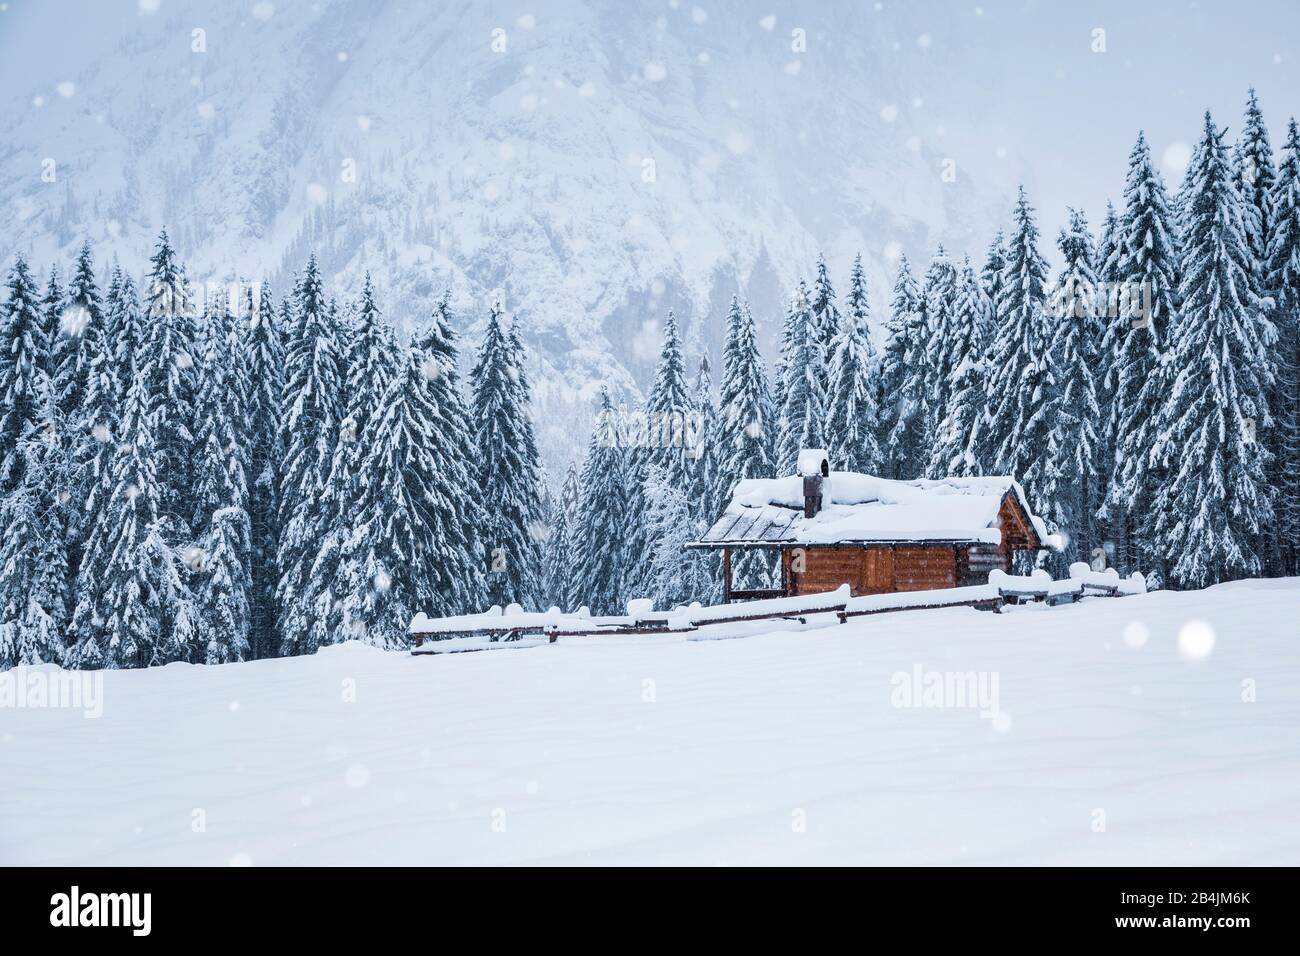 winter landscape with a wooden house in snowy mountains, Ansiei valley, Auronzo di Cadore, Belluno, Veneto, Italy Stock Photo